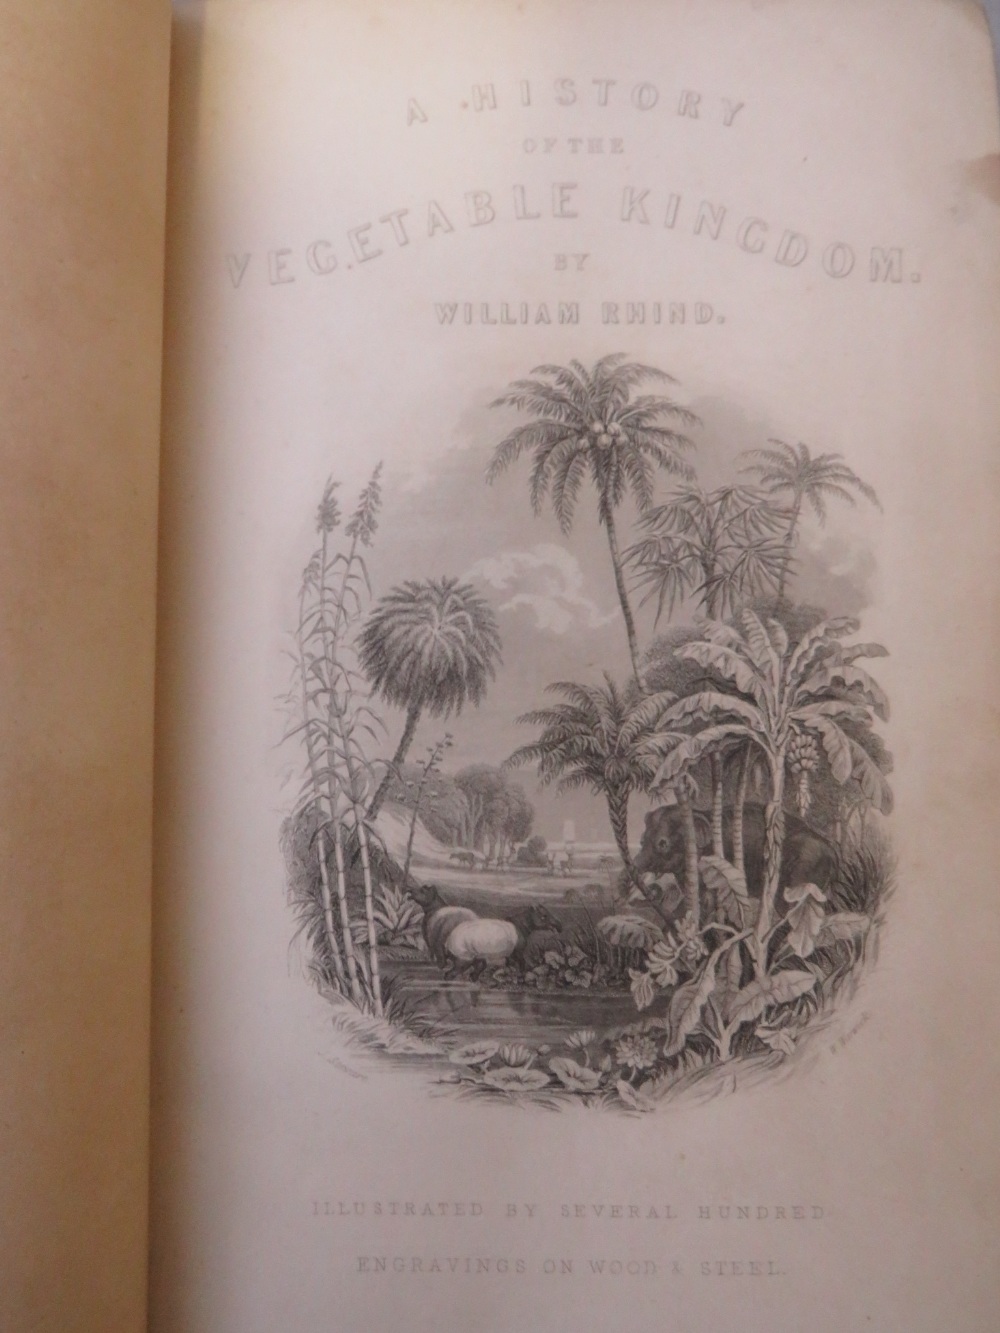 FIVE NATURAL HISTORY BOOKS - WILLIAM RHIND, 'A History of the Vegetable Kingdom' 1865, John Evelyn - - Image 6 of 10